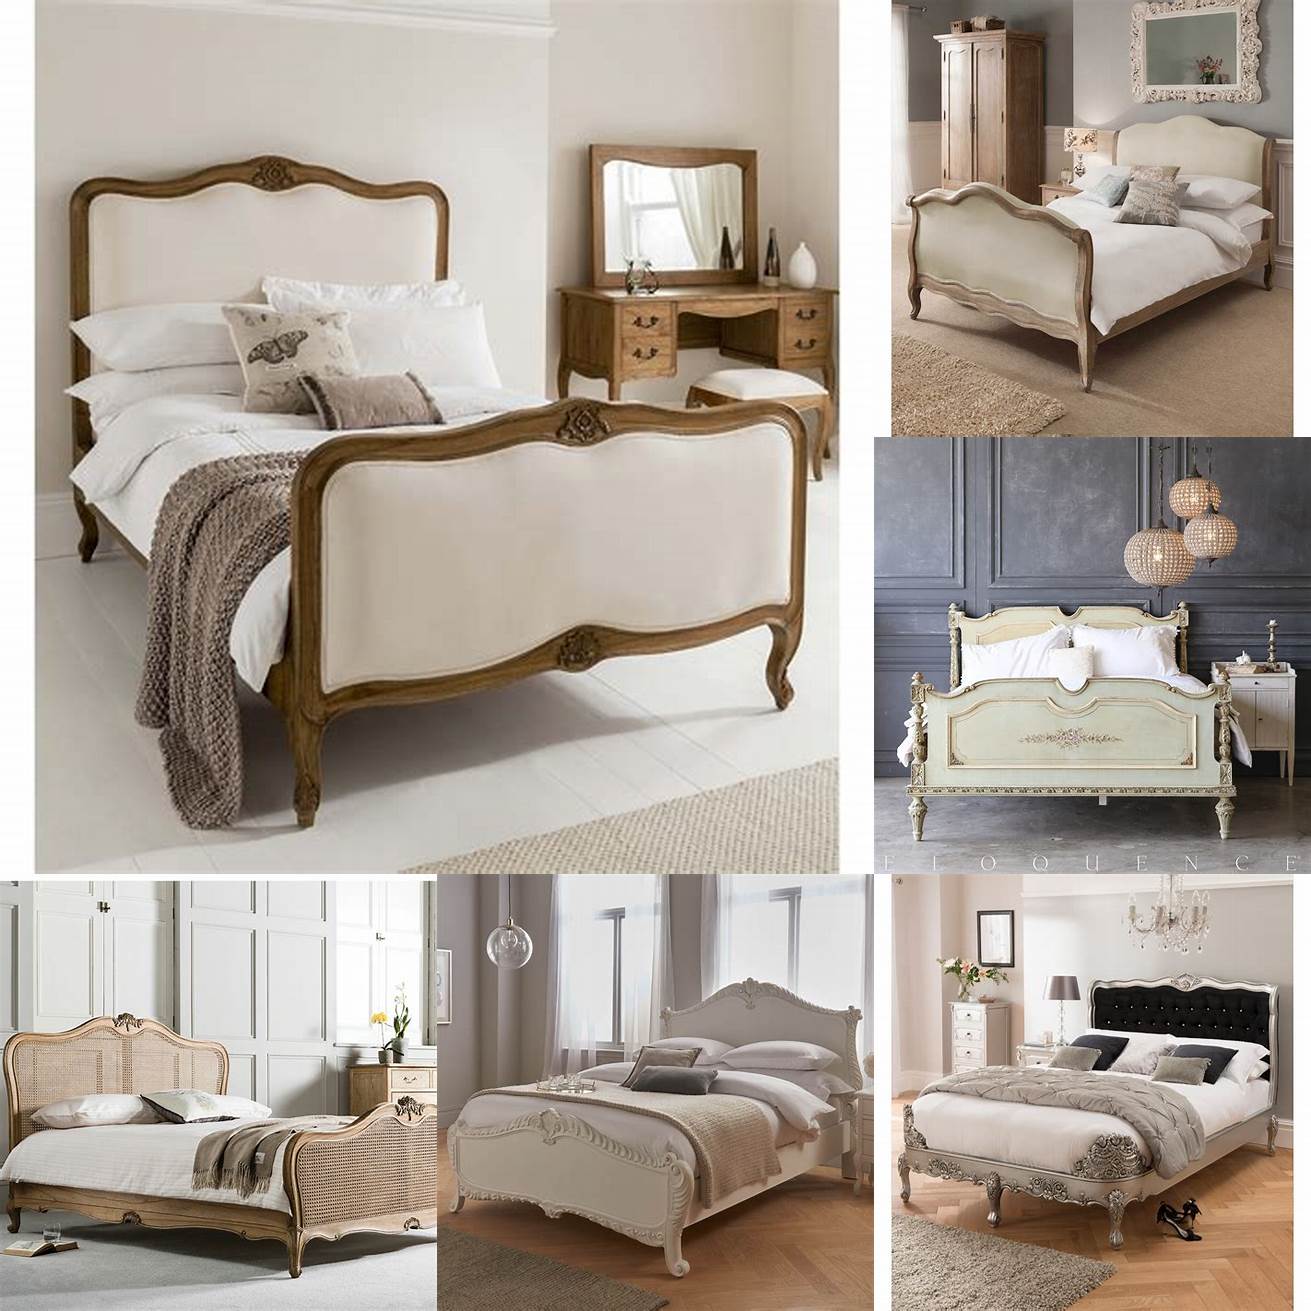 French-style beds